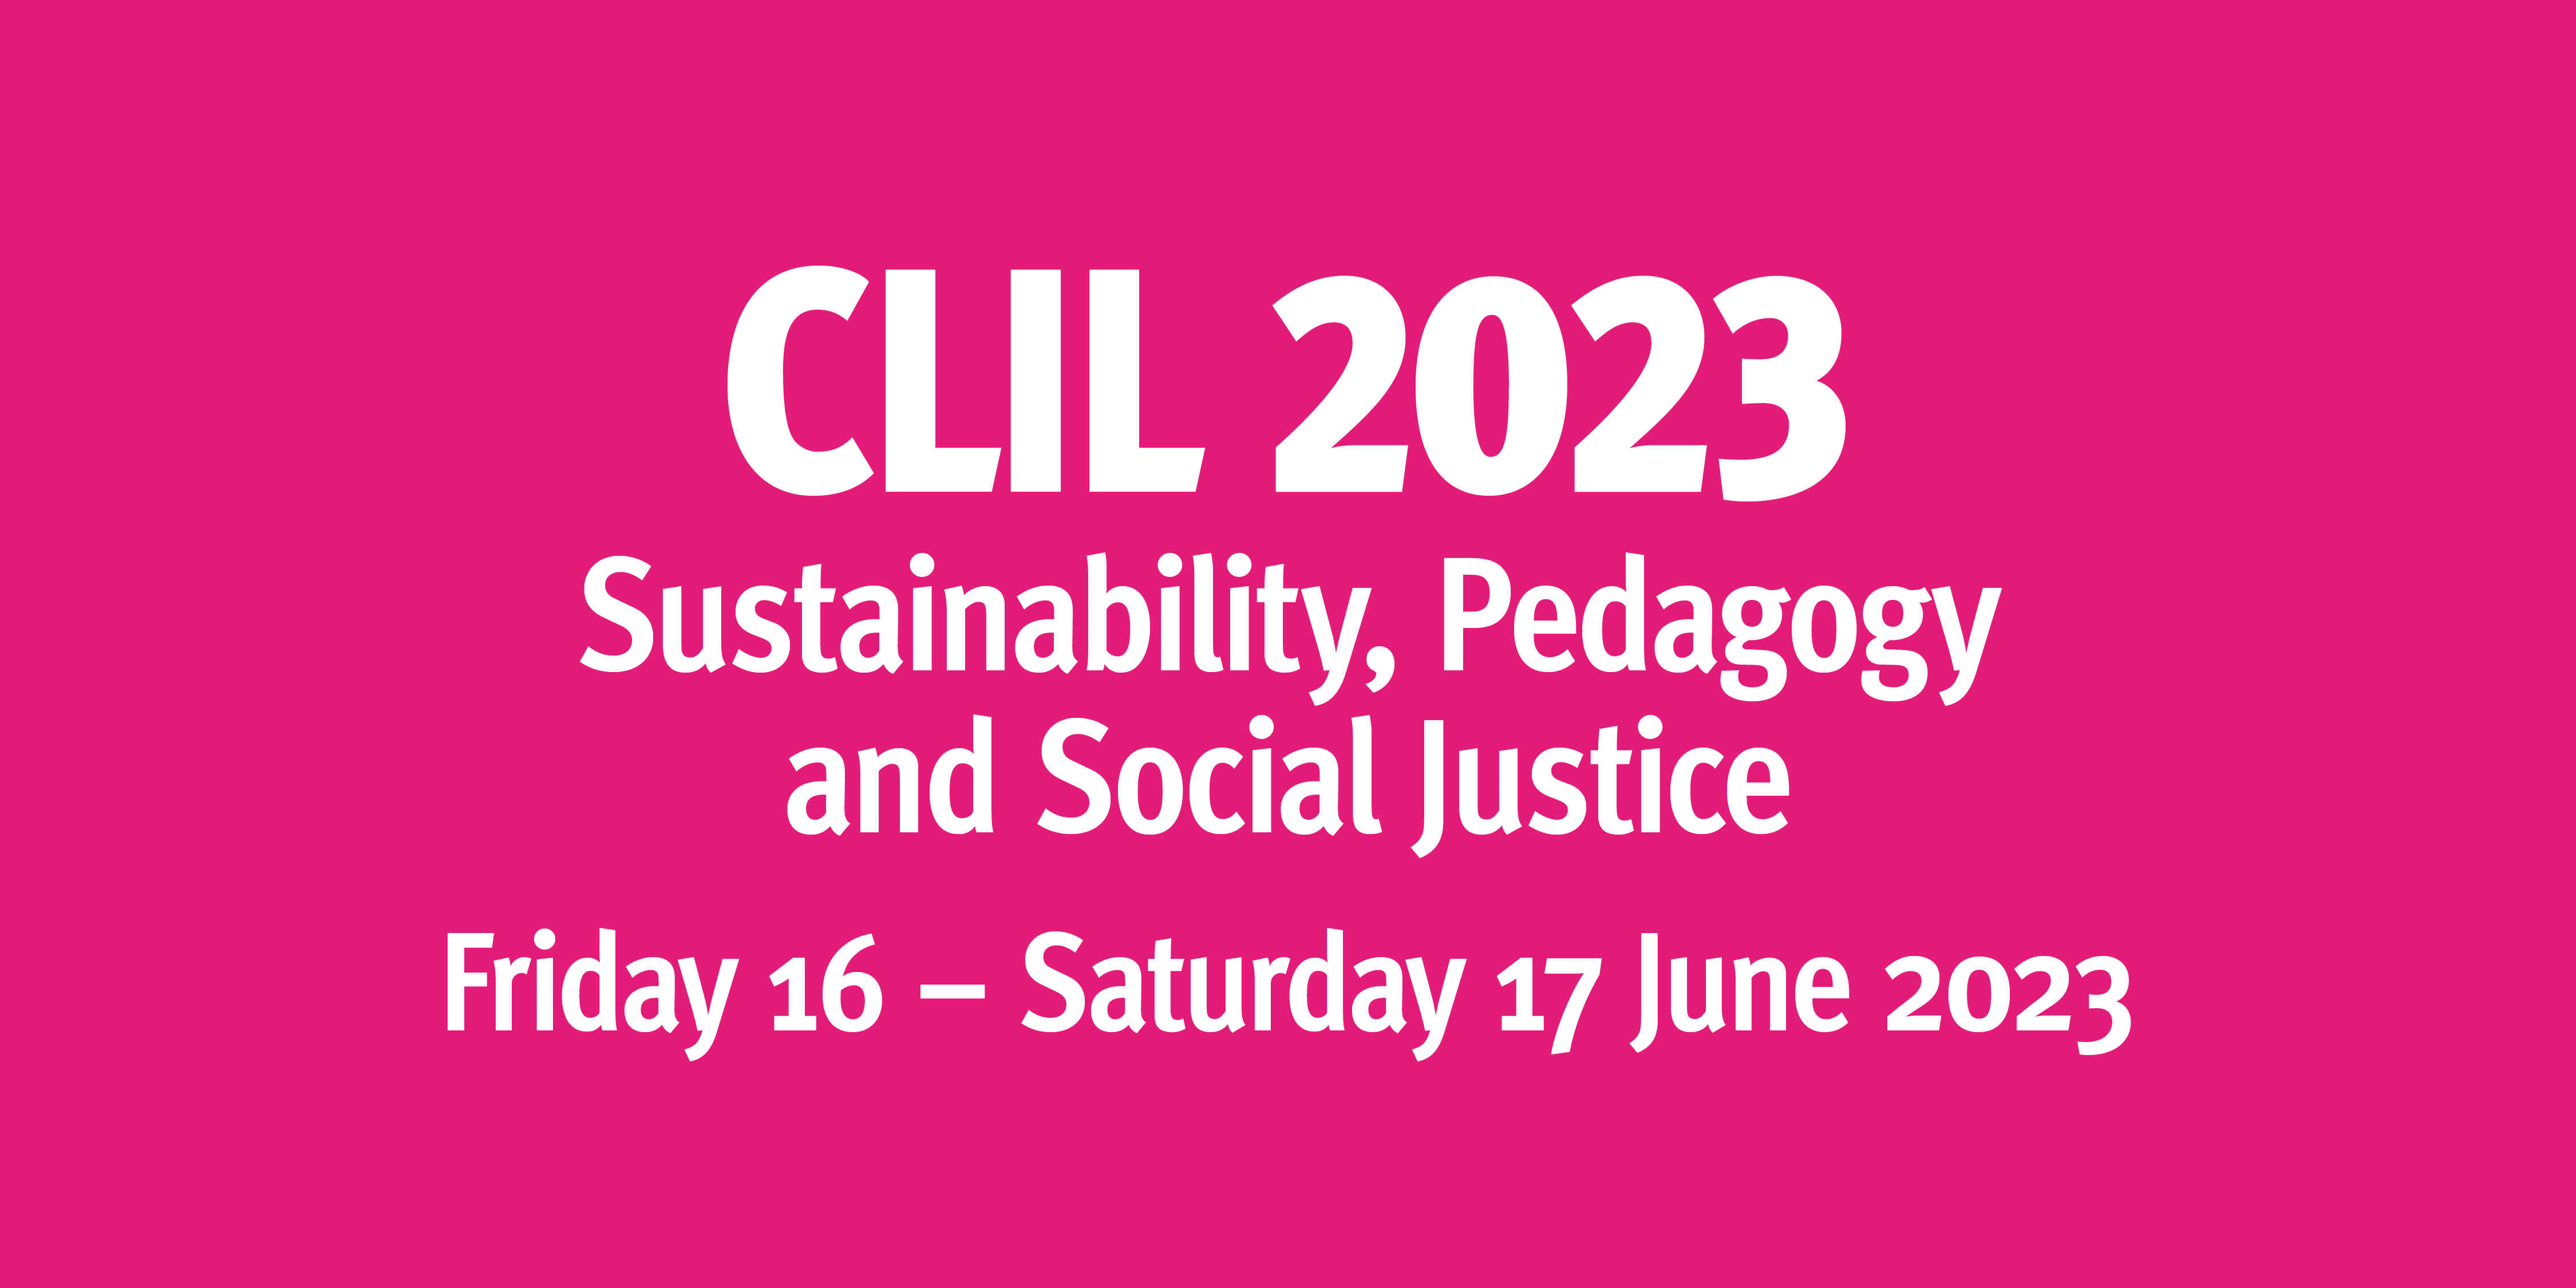 CLIL 2023 Sustainability, Pedagogy and Social Justice